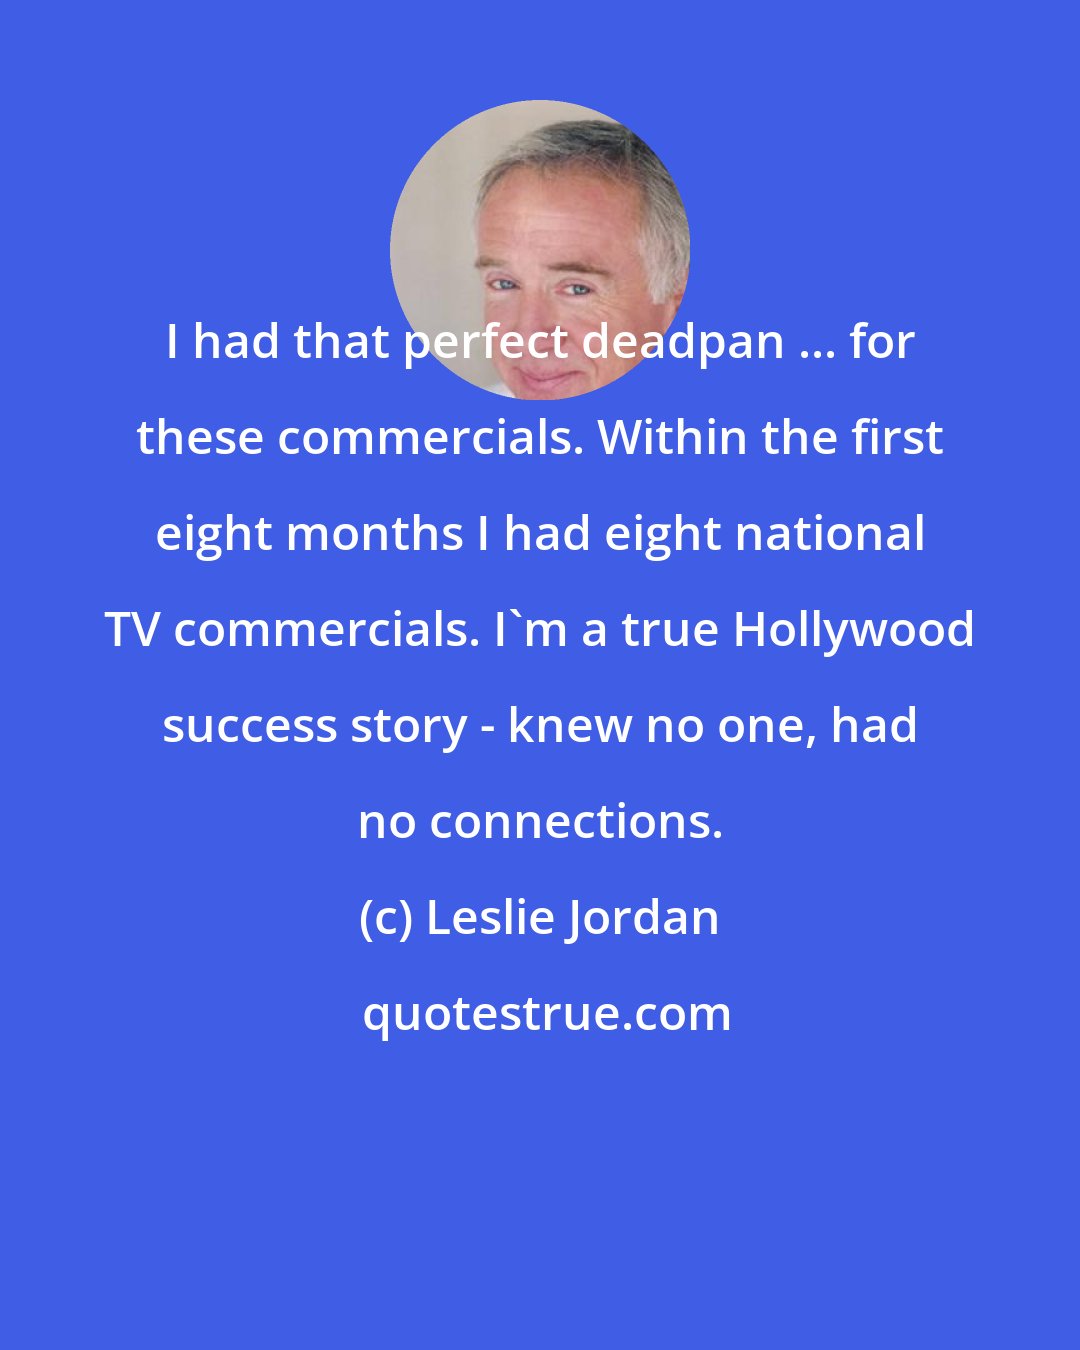 Leslie Jordan: I had that perfect deadpan ... for these commercials. Within the first eight months I had eight national TV commercials. I'm a true Hollywood success story - knew no one, had no connections.